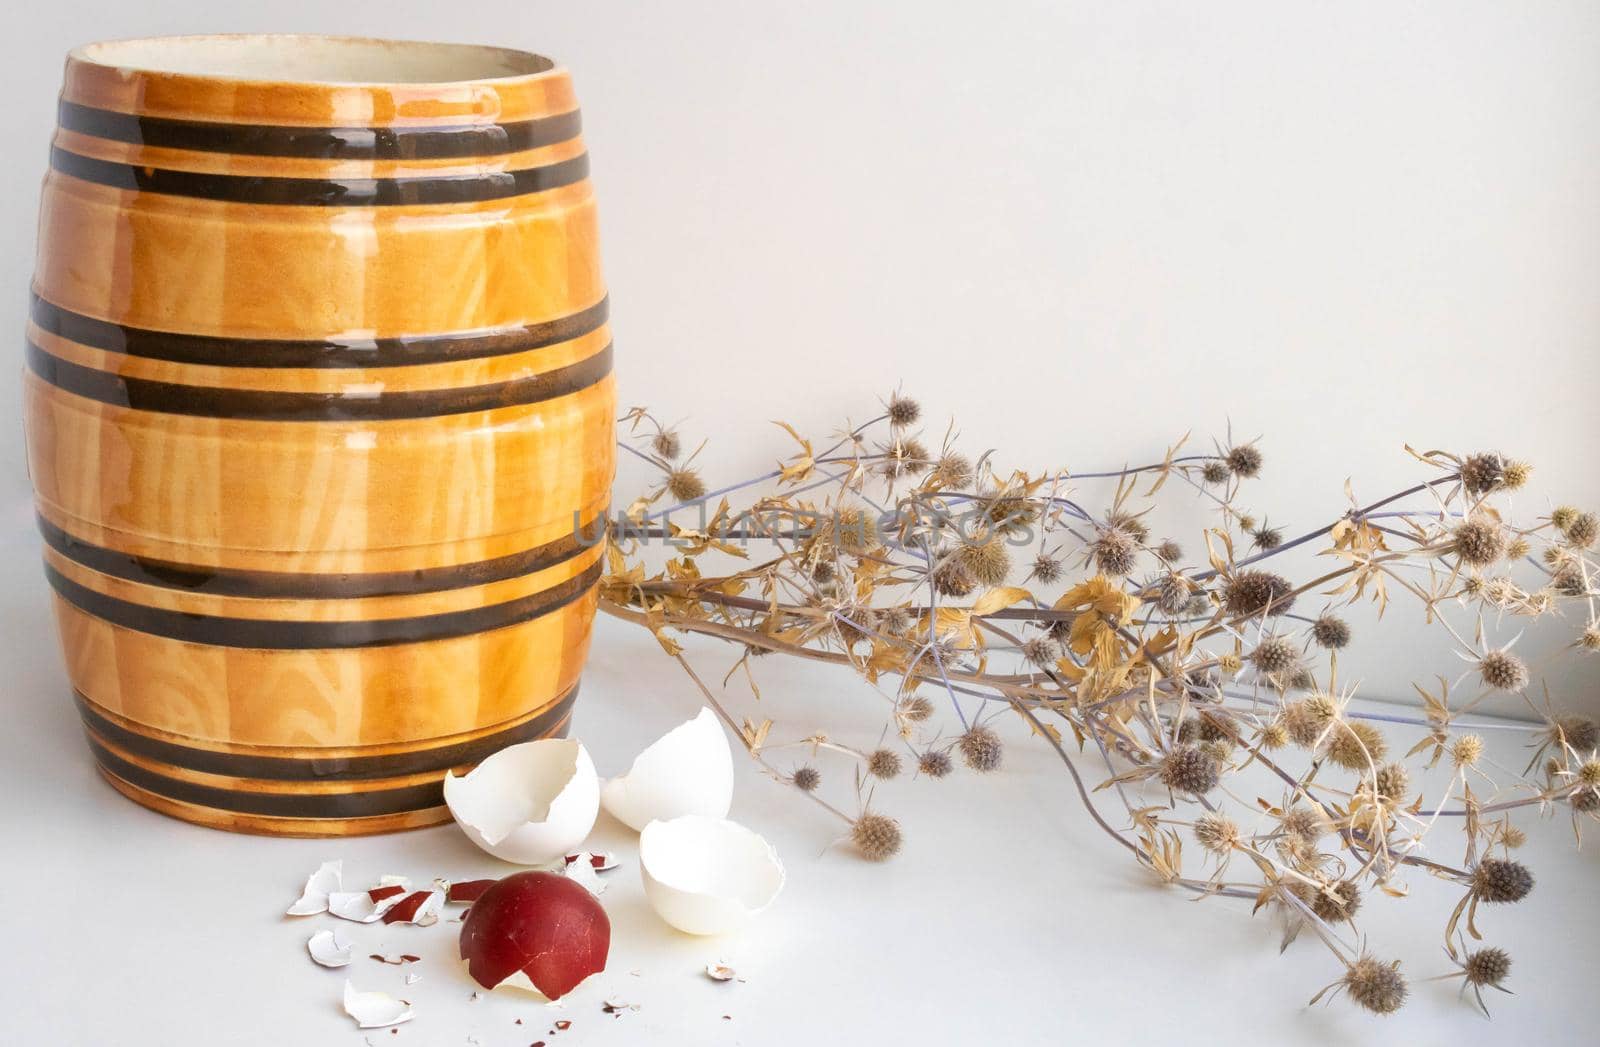 Easter. Still life with eggshells, clay barrel and dried flowers on a white background by lapushka62